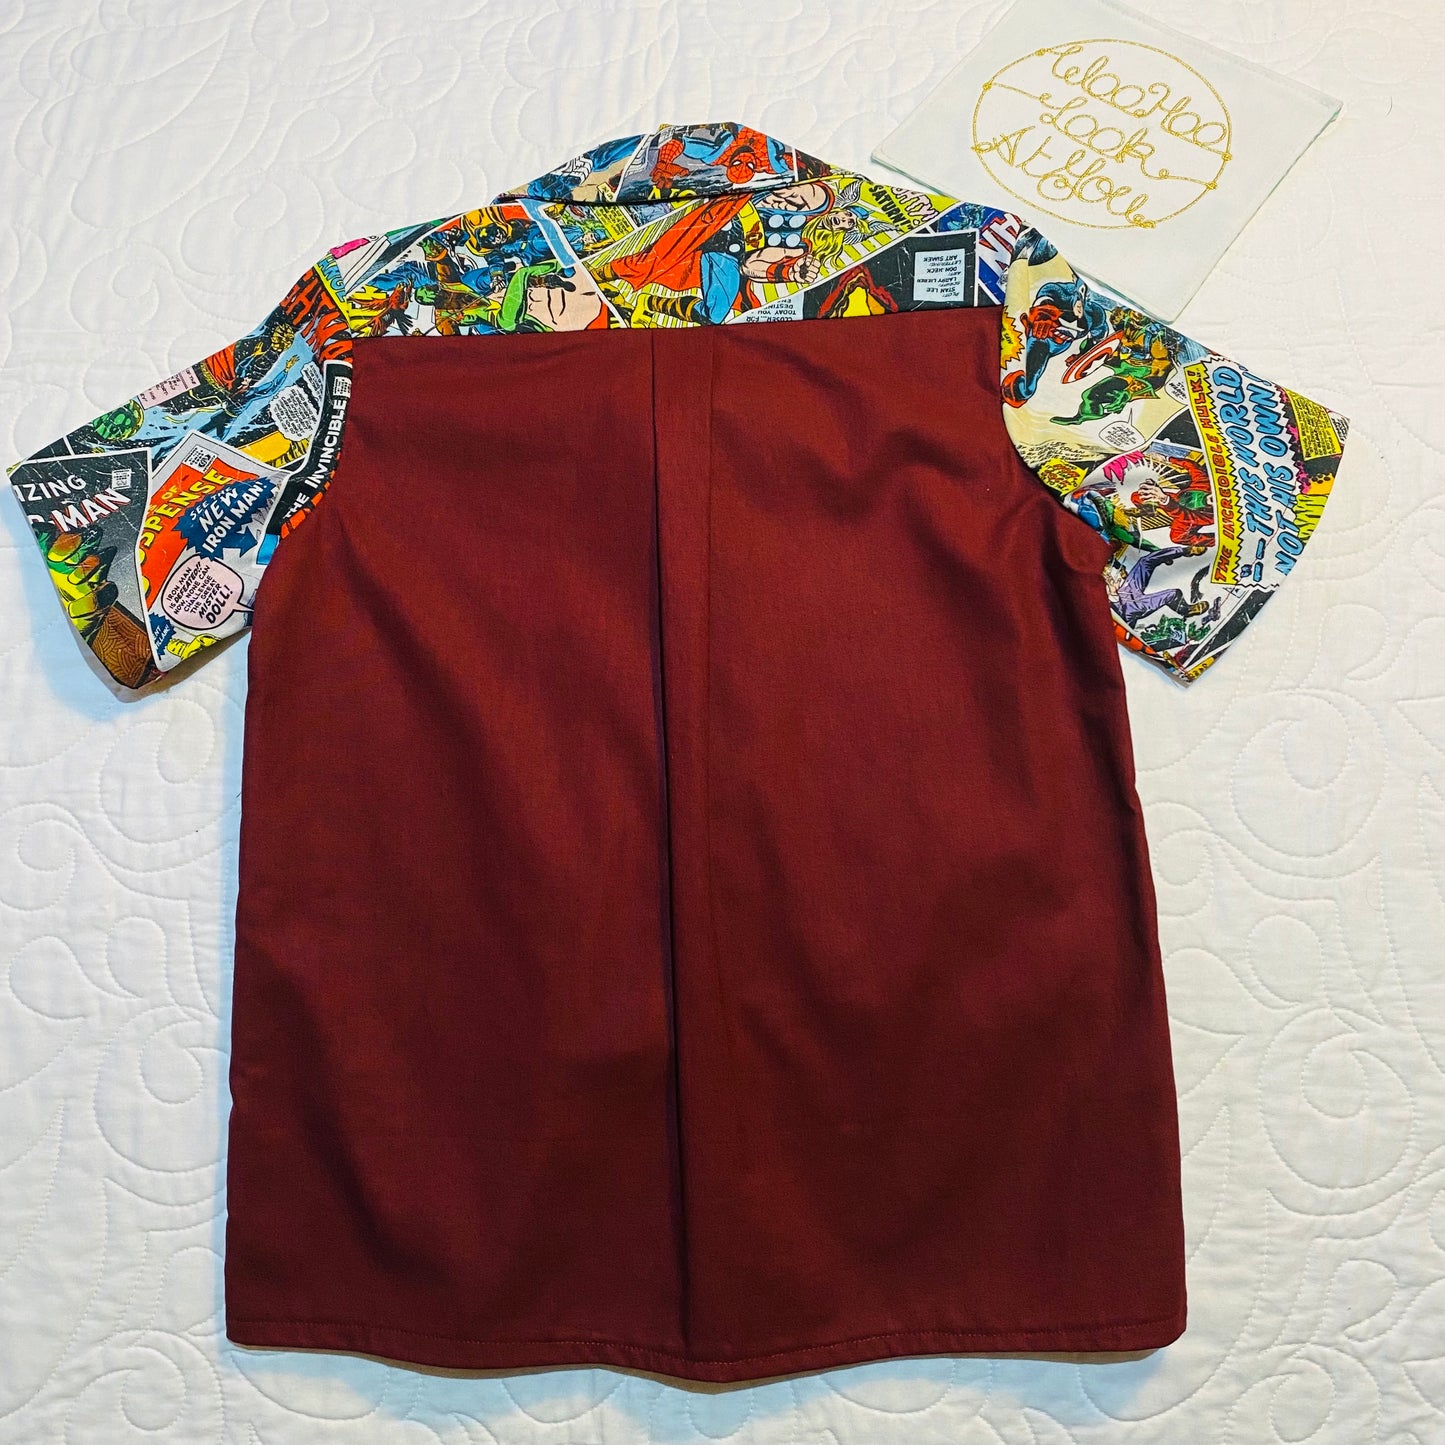 Shirt - Super Hero Comics - Maroon Front and Back with Contrasting Comic Pocket